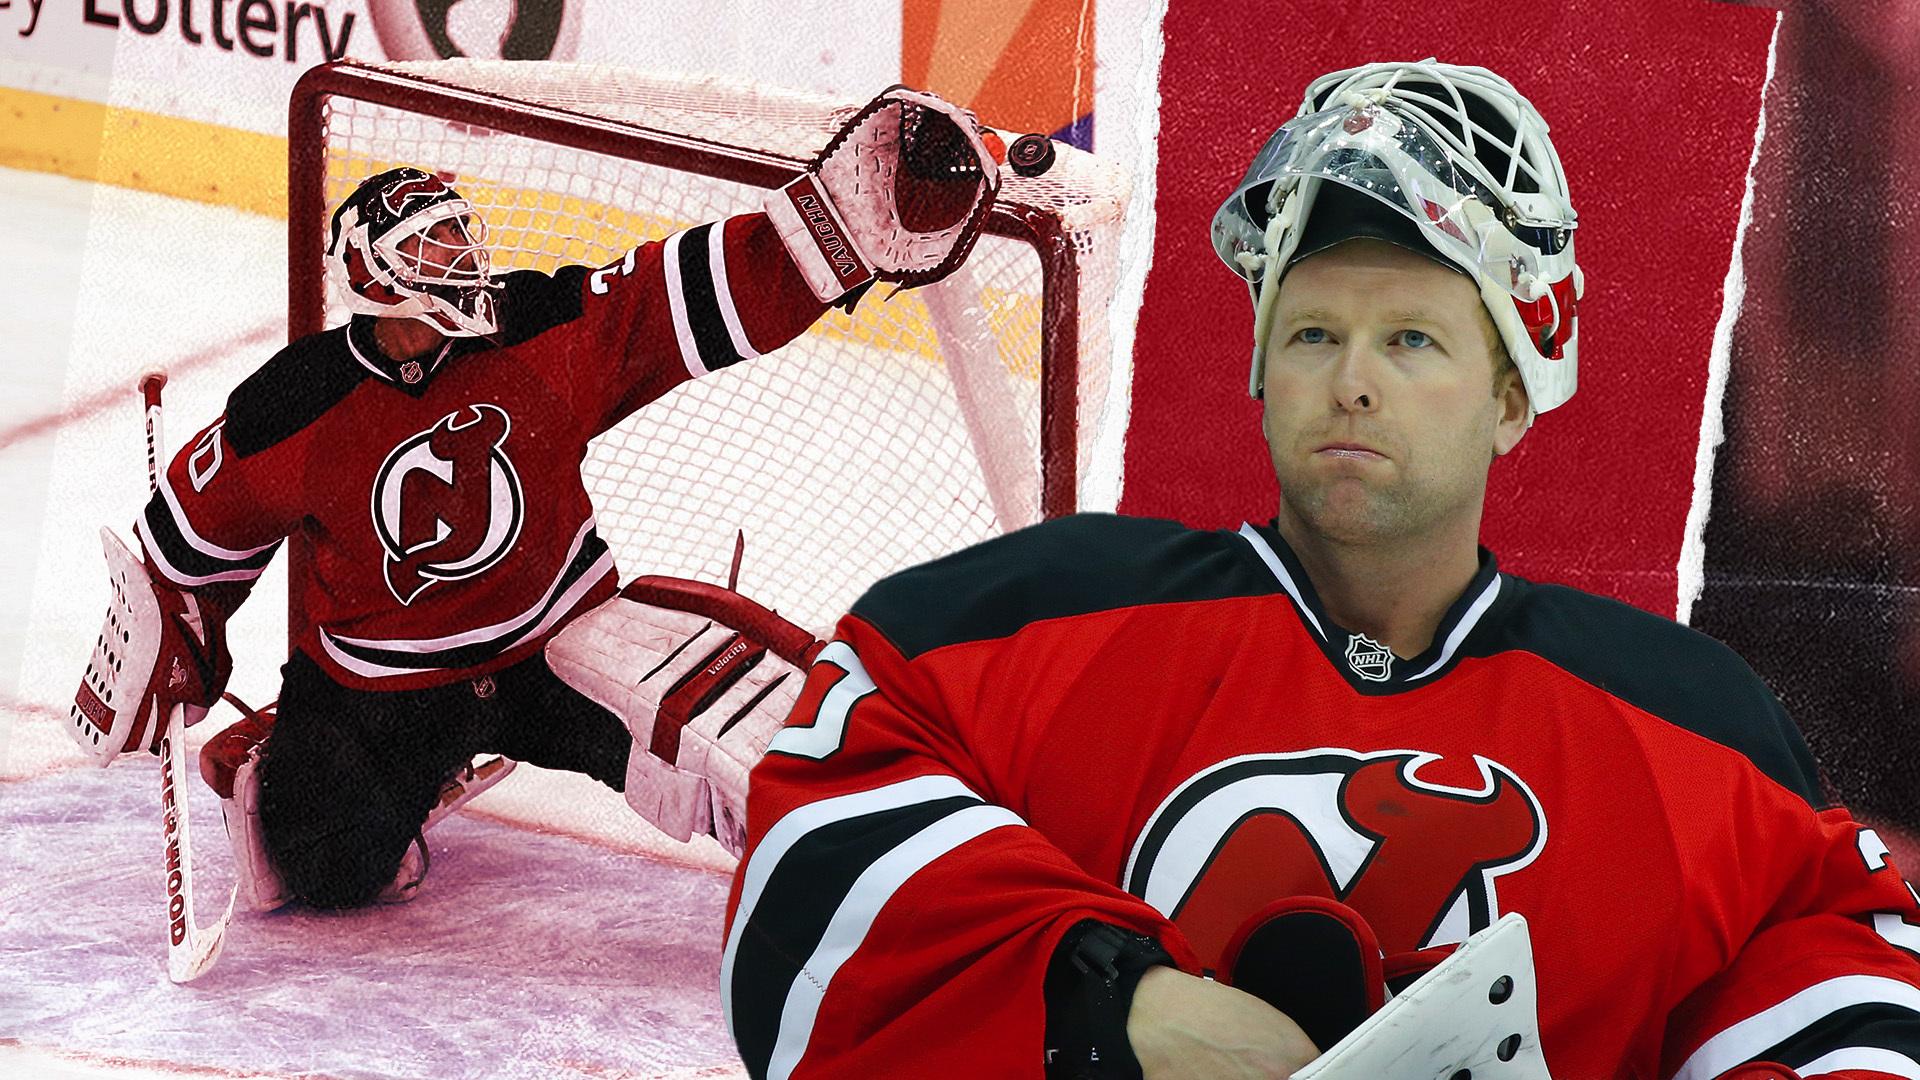 Martin Brodeur / SNY Treated Image